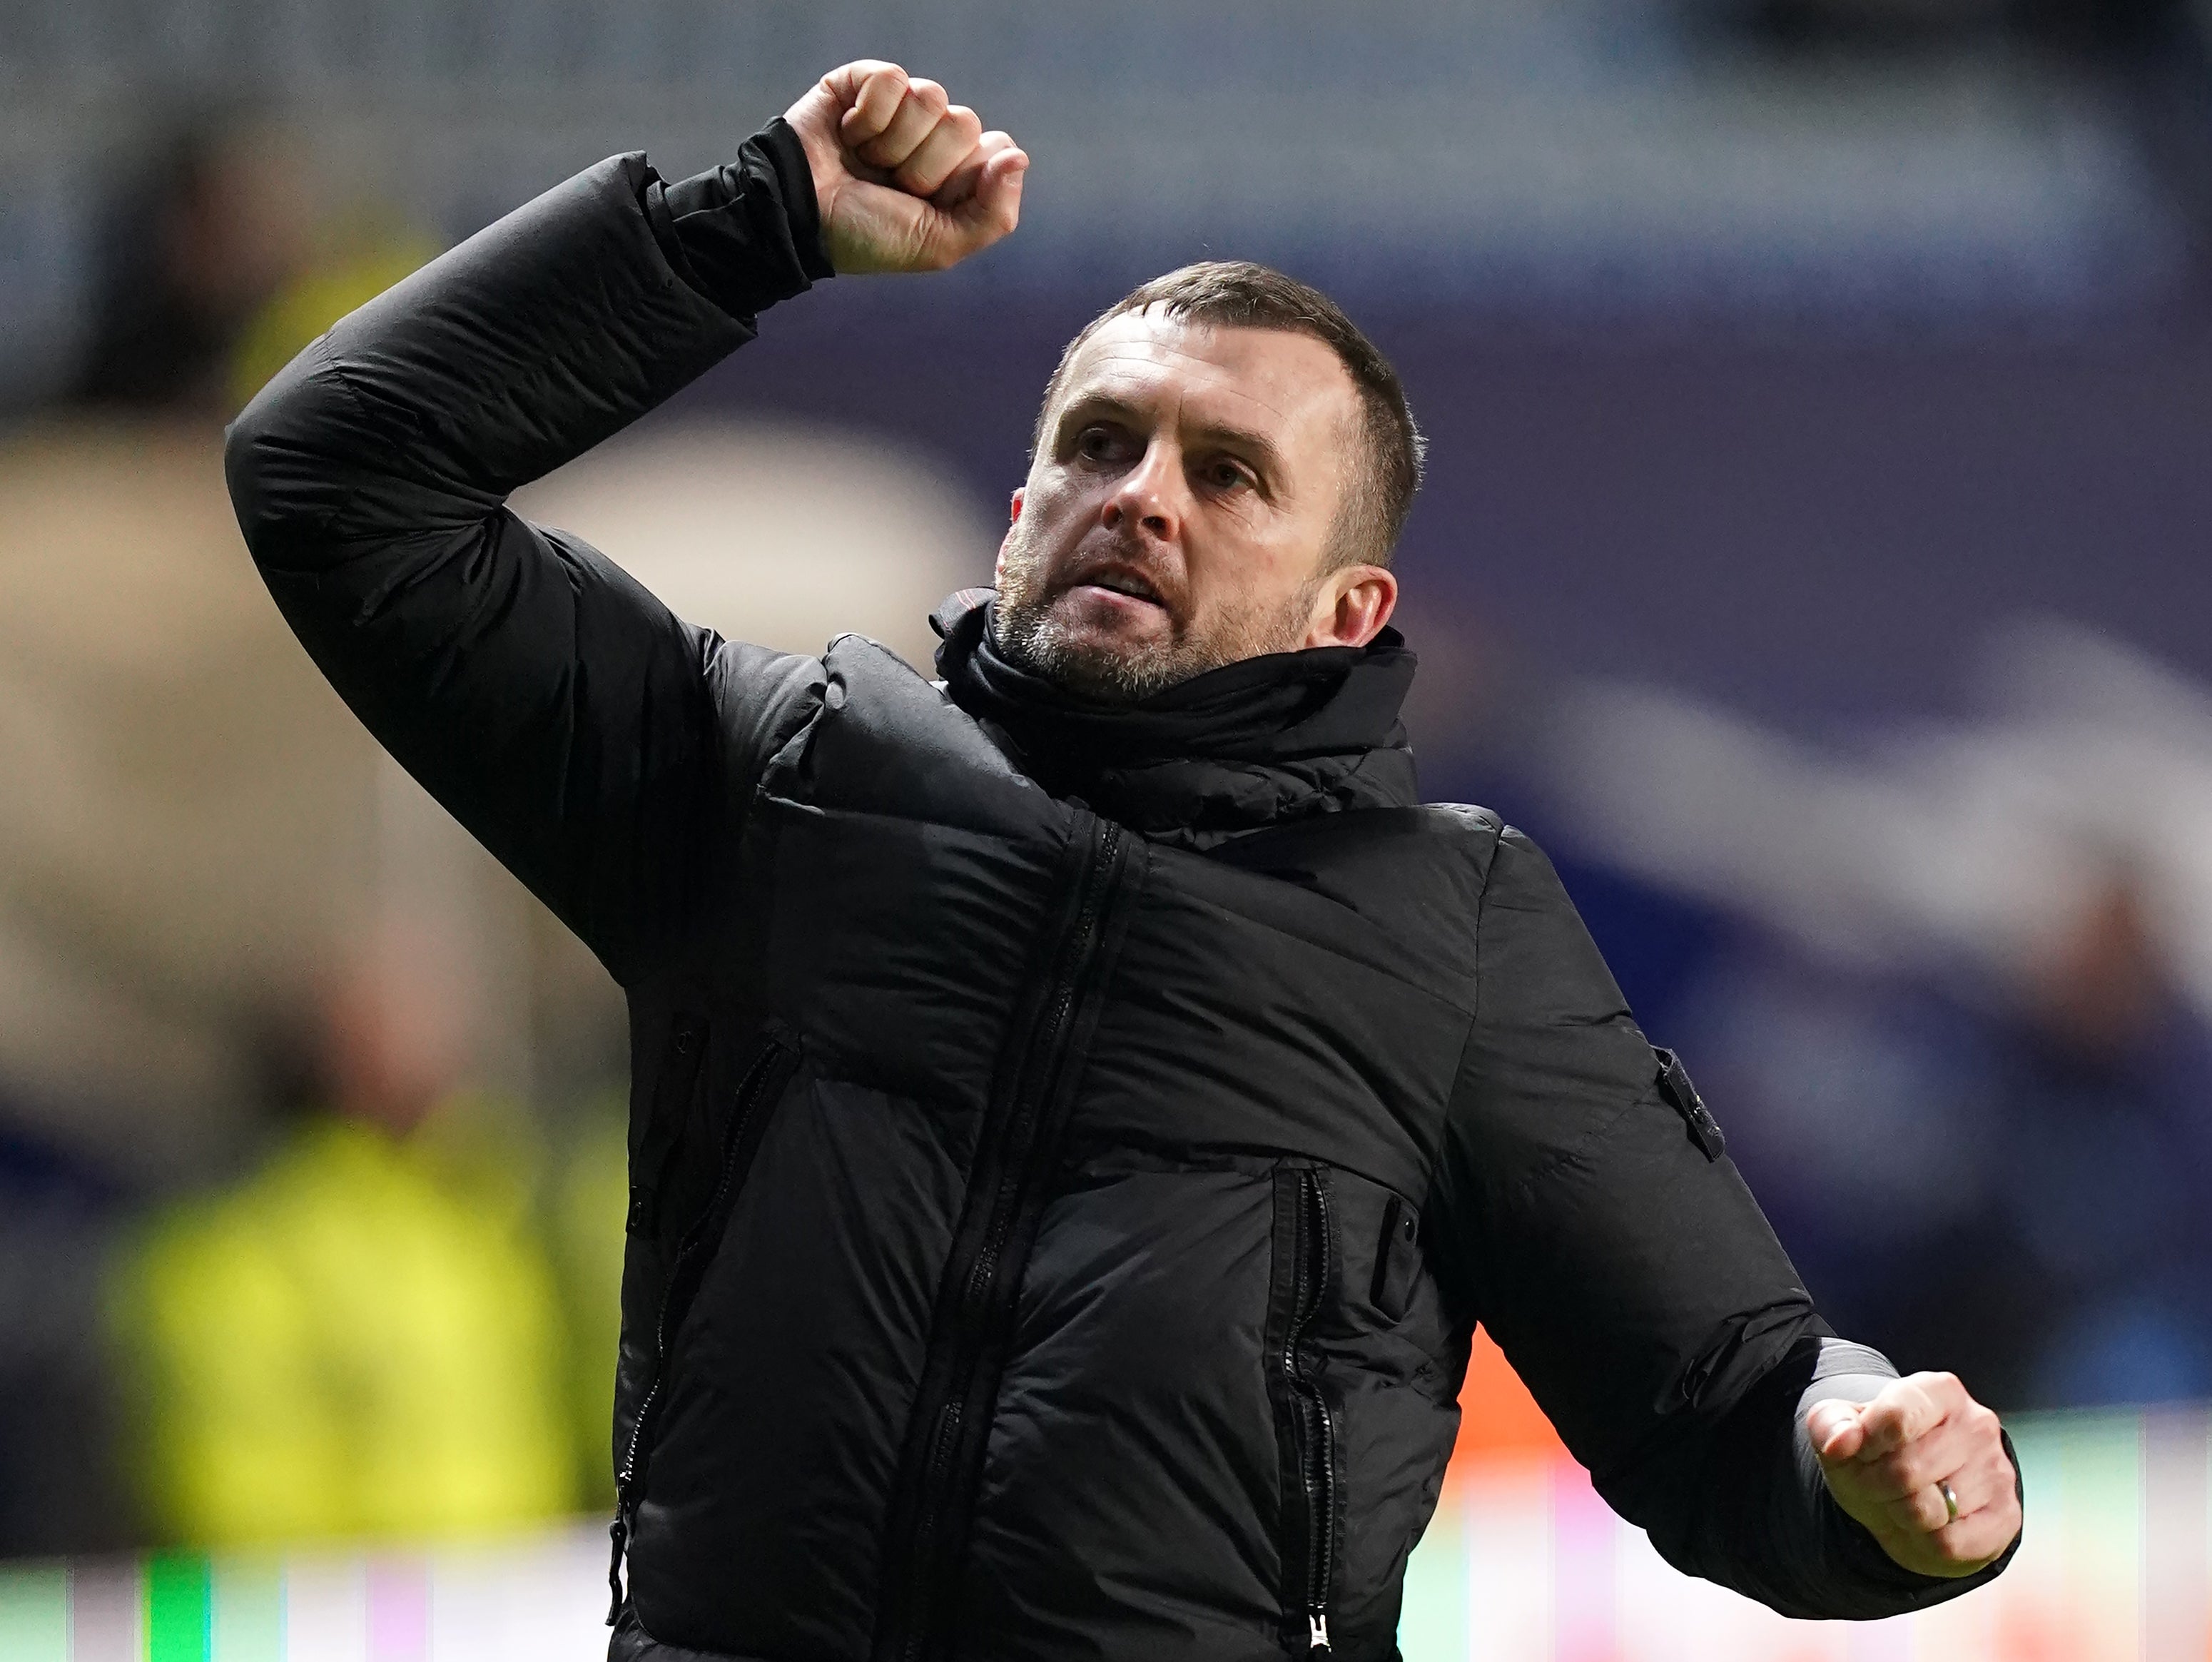 Luton Town manager Nathan Jones salutes the fans after the final whistle following the Sky Bet Championship match at the Coventry Building Society Arena, Coventry. Picture date: Tuesday March 8, 2022.